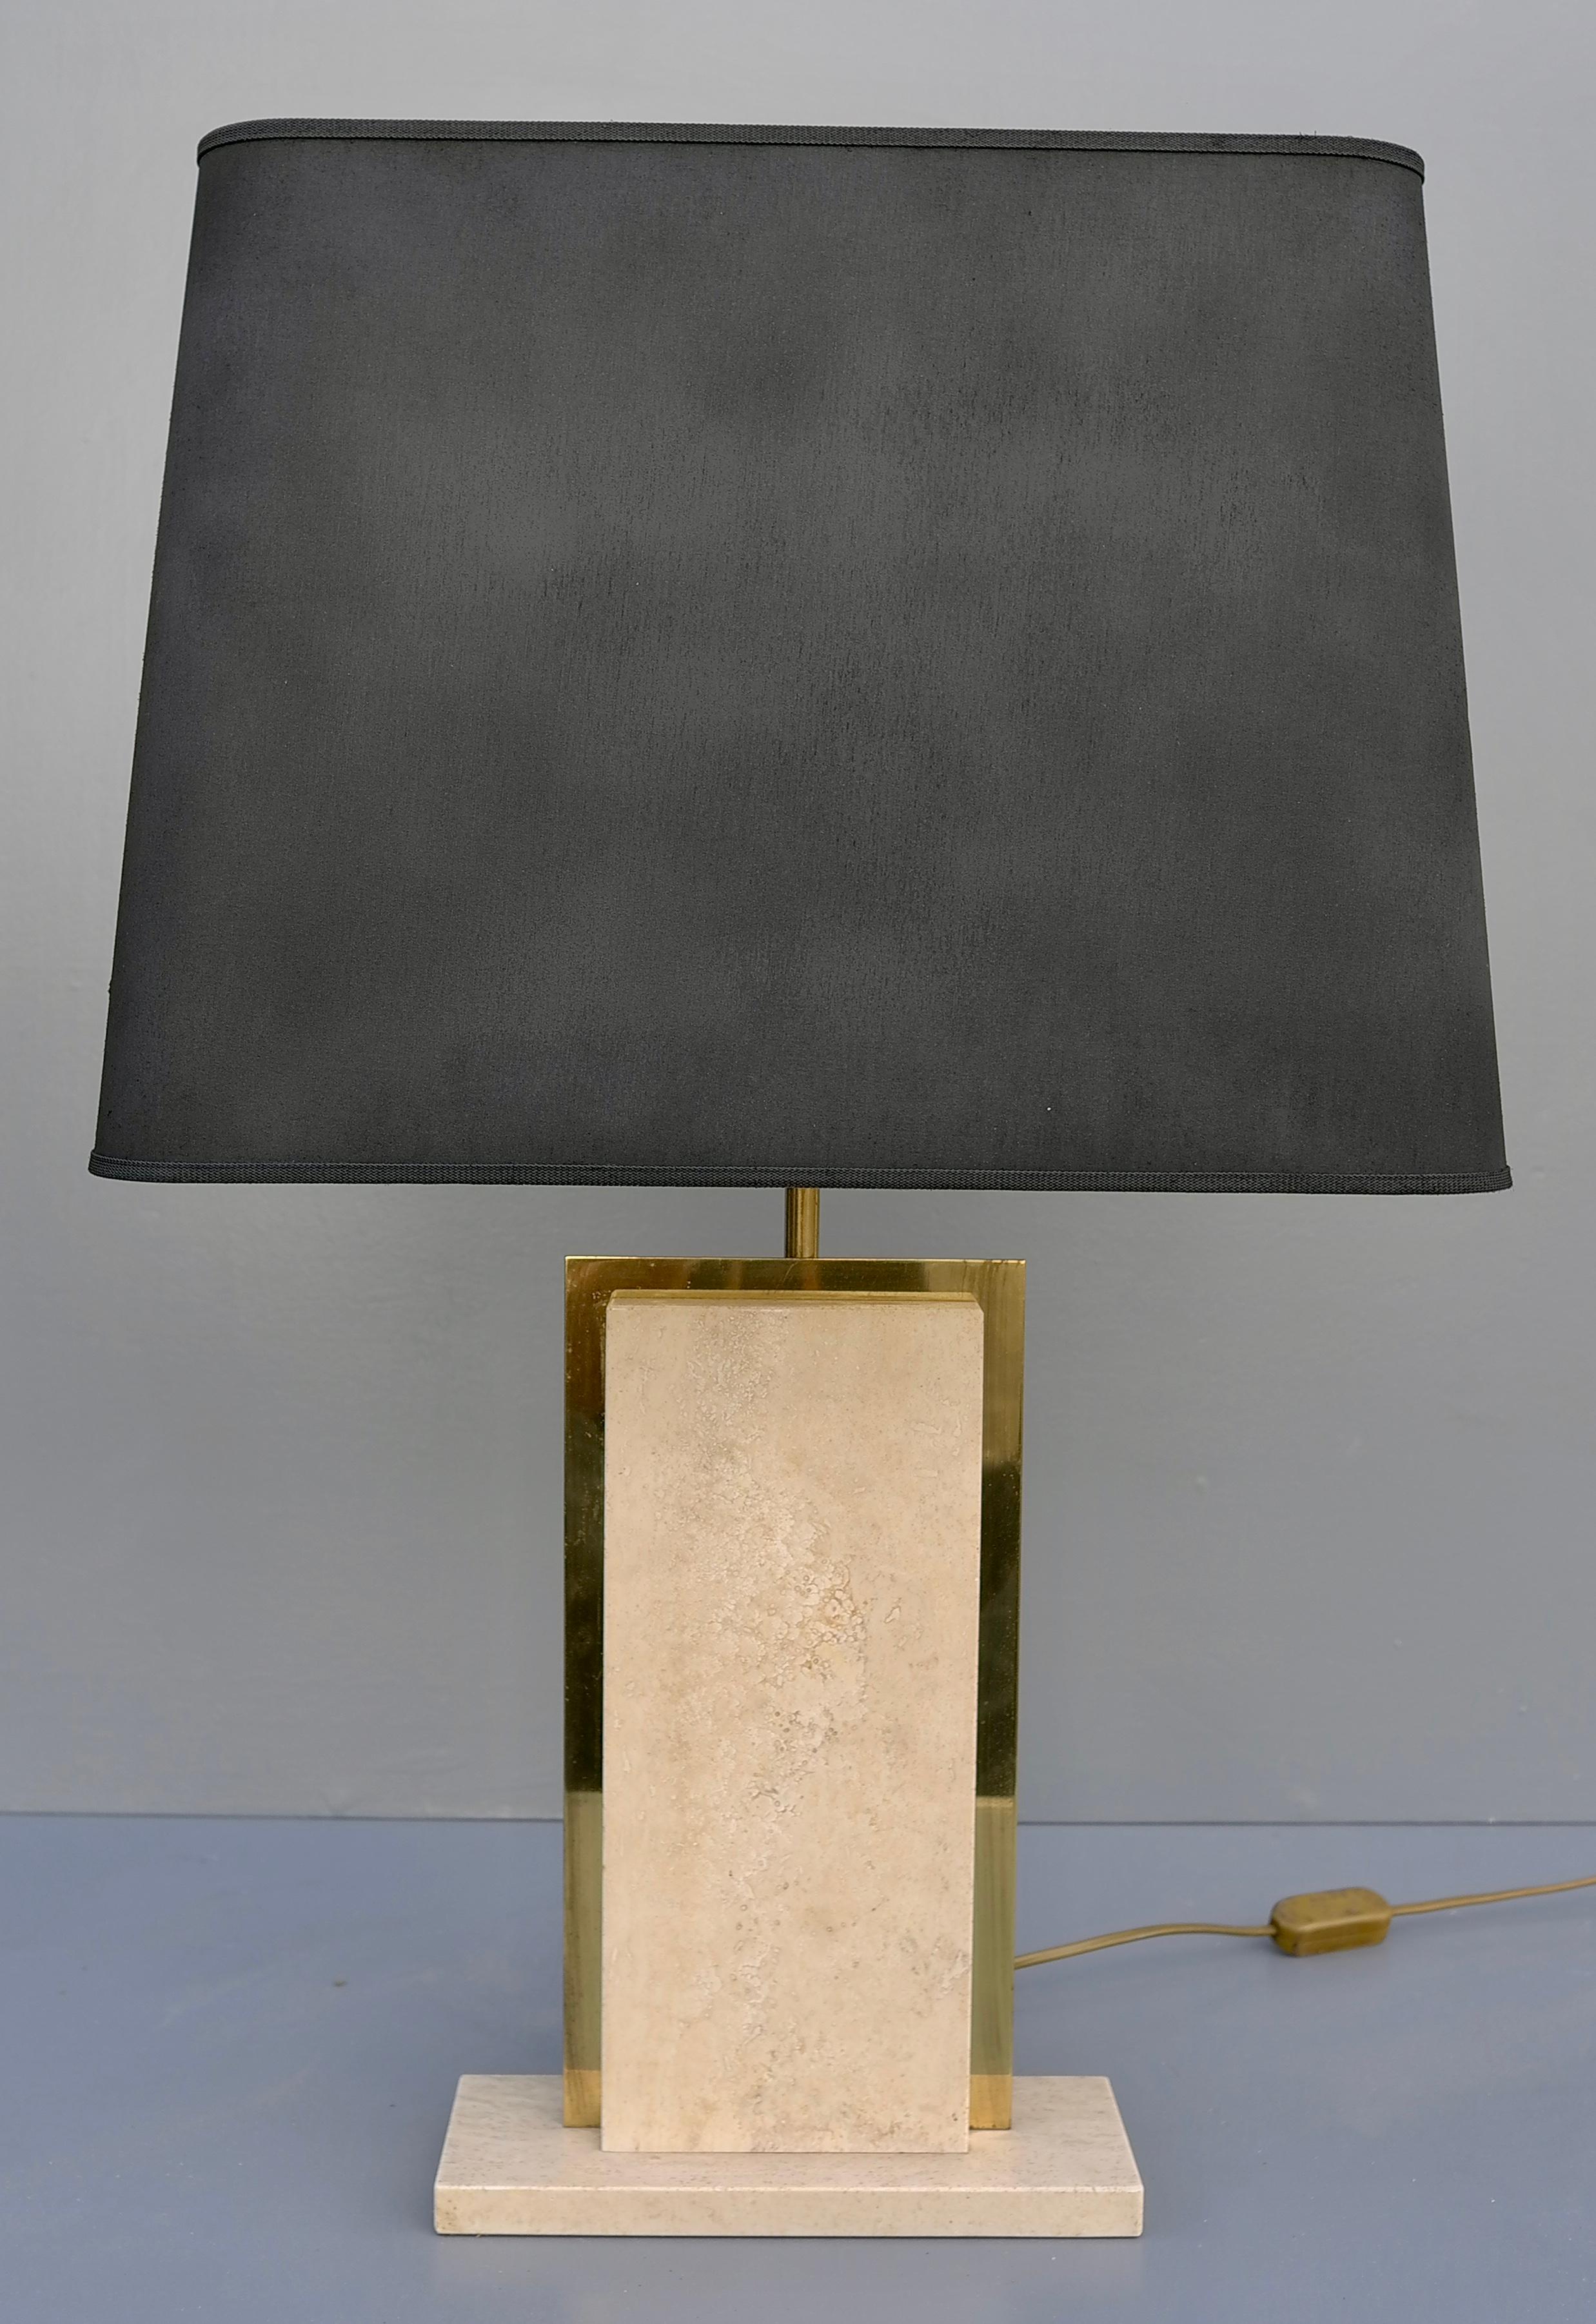 Travertine and Brass Sculptural Mid-Century Modern Table Lamps, Belgium 1970's For Sale 3